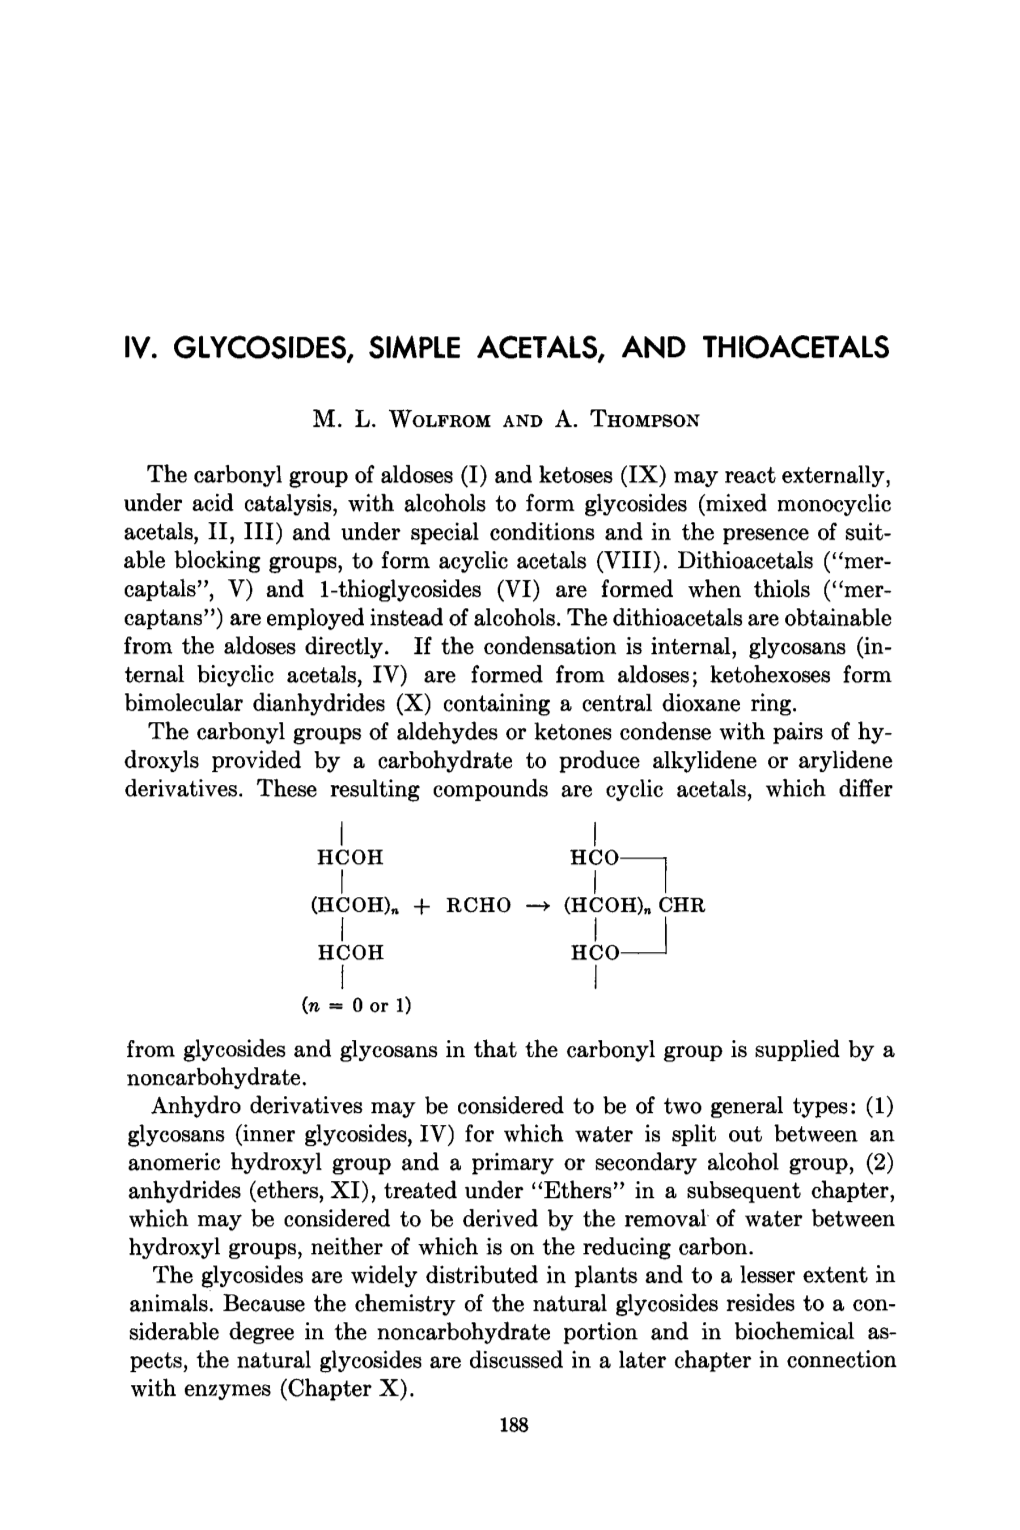 Glycosides, Simple Acetals, and Thioacetals